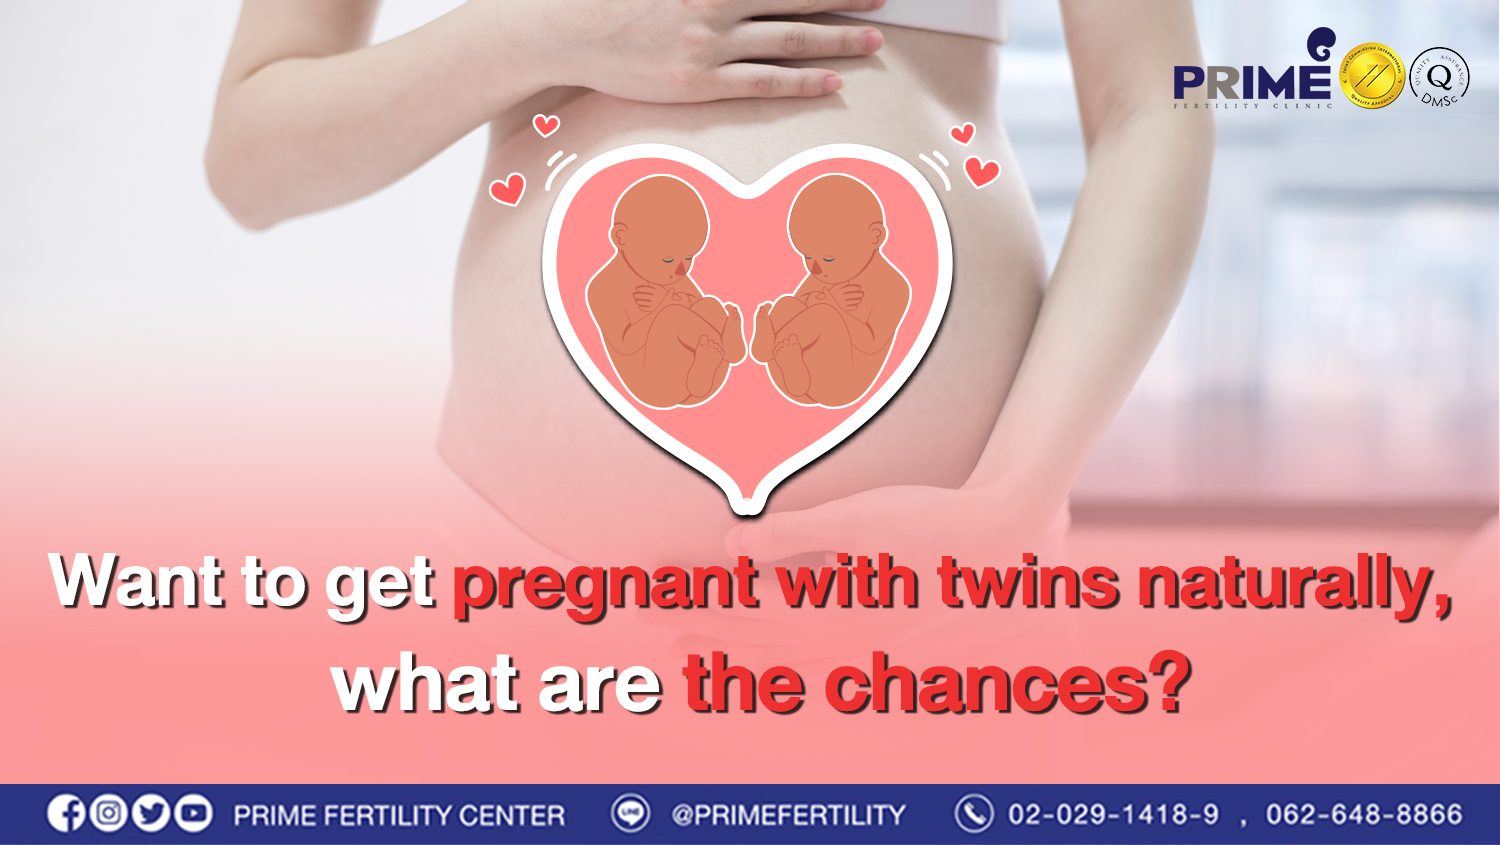 Want to get pregnant with twins naturally, what are the chances?